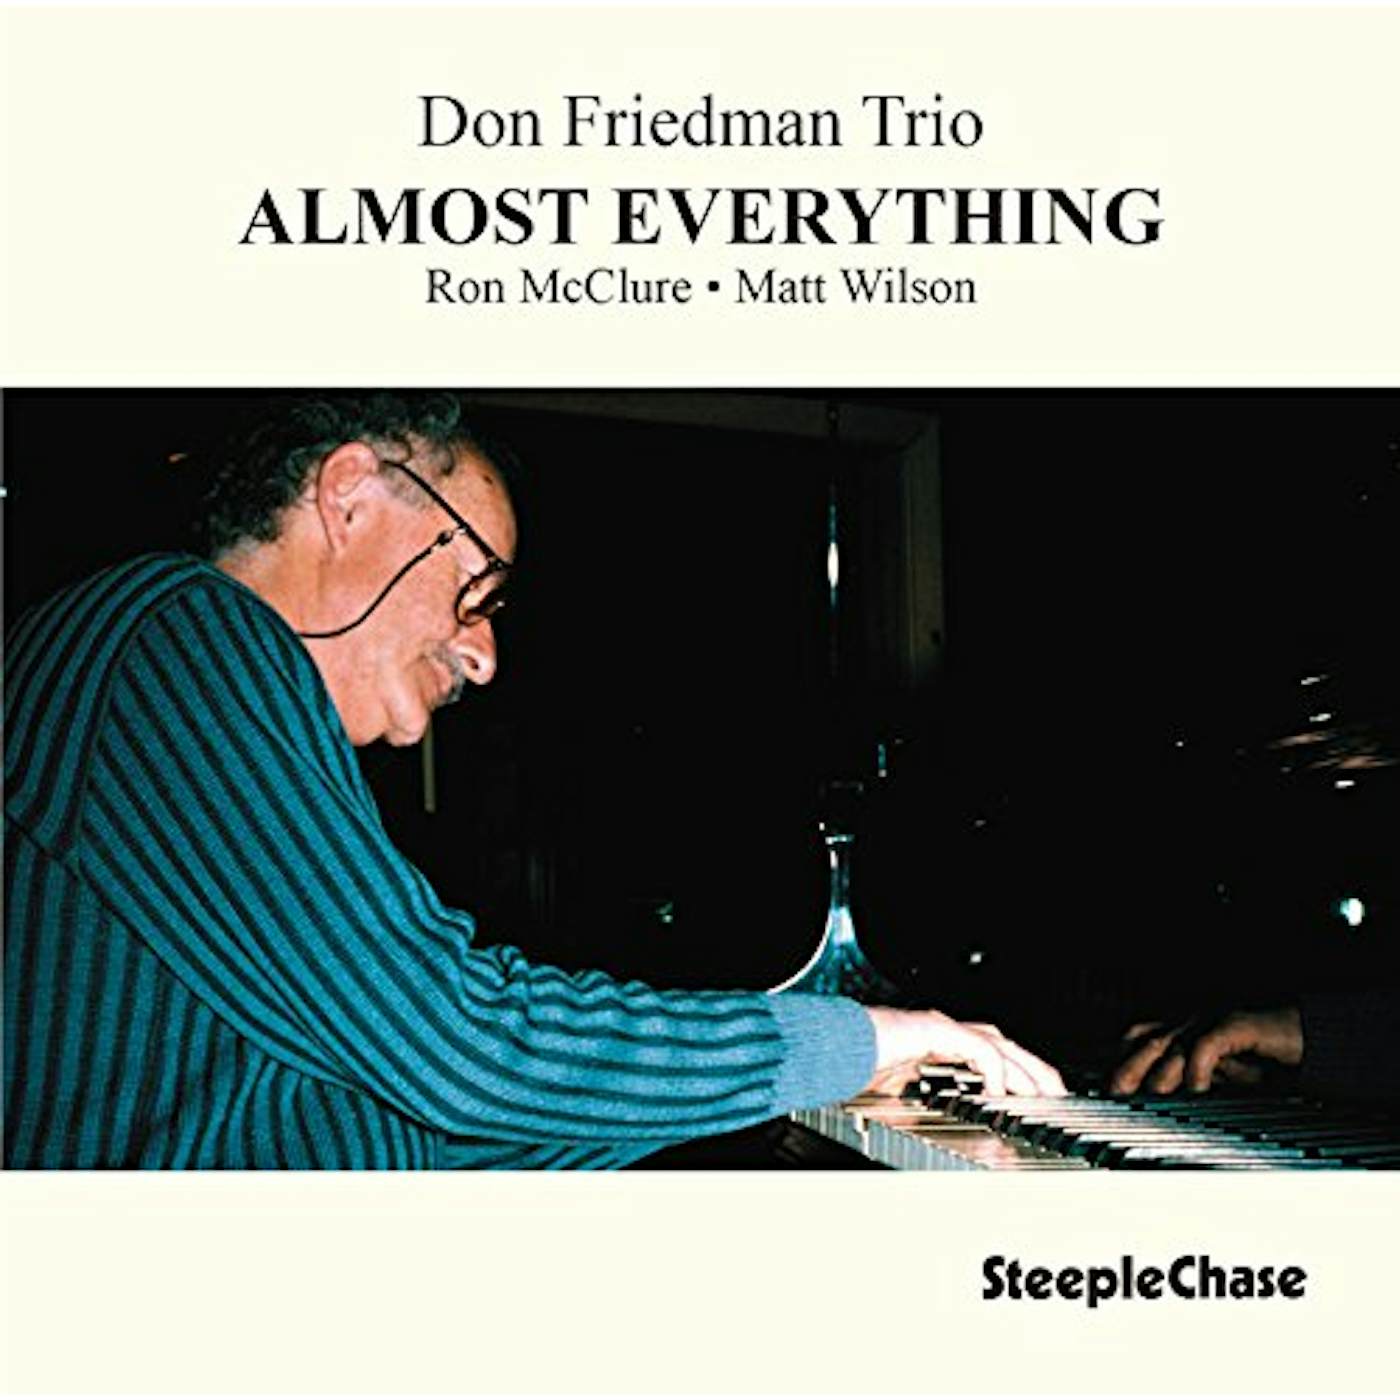 Don Friedman ALMOST EVERYTHING CD